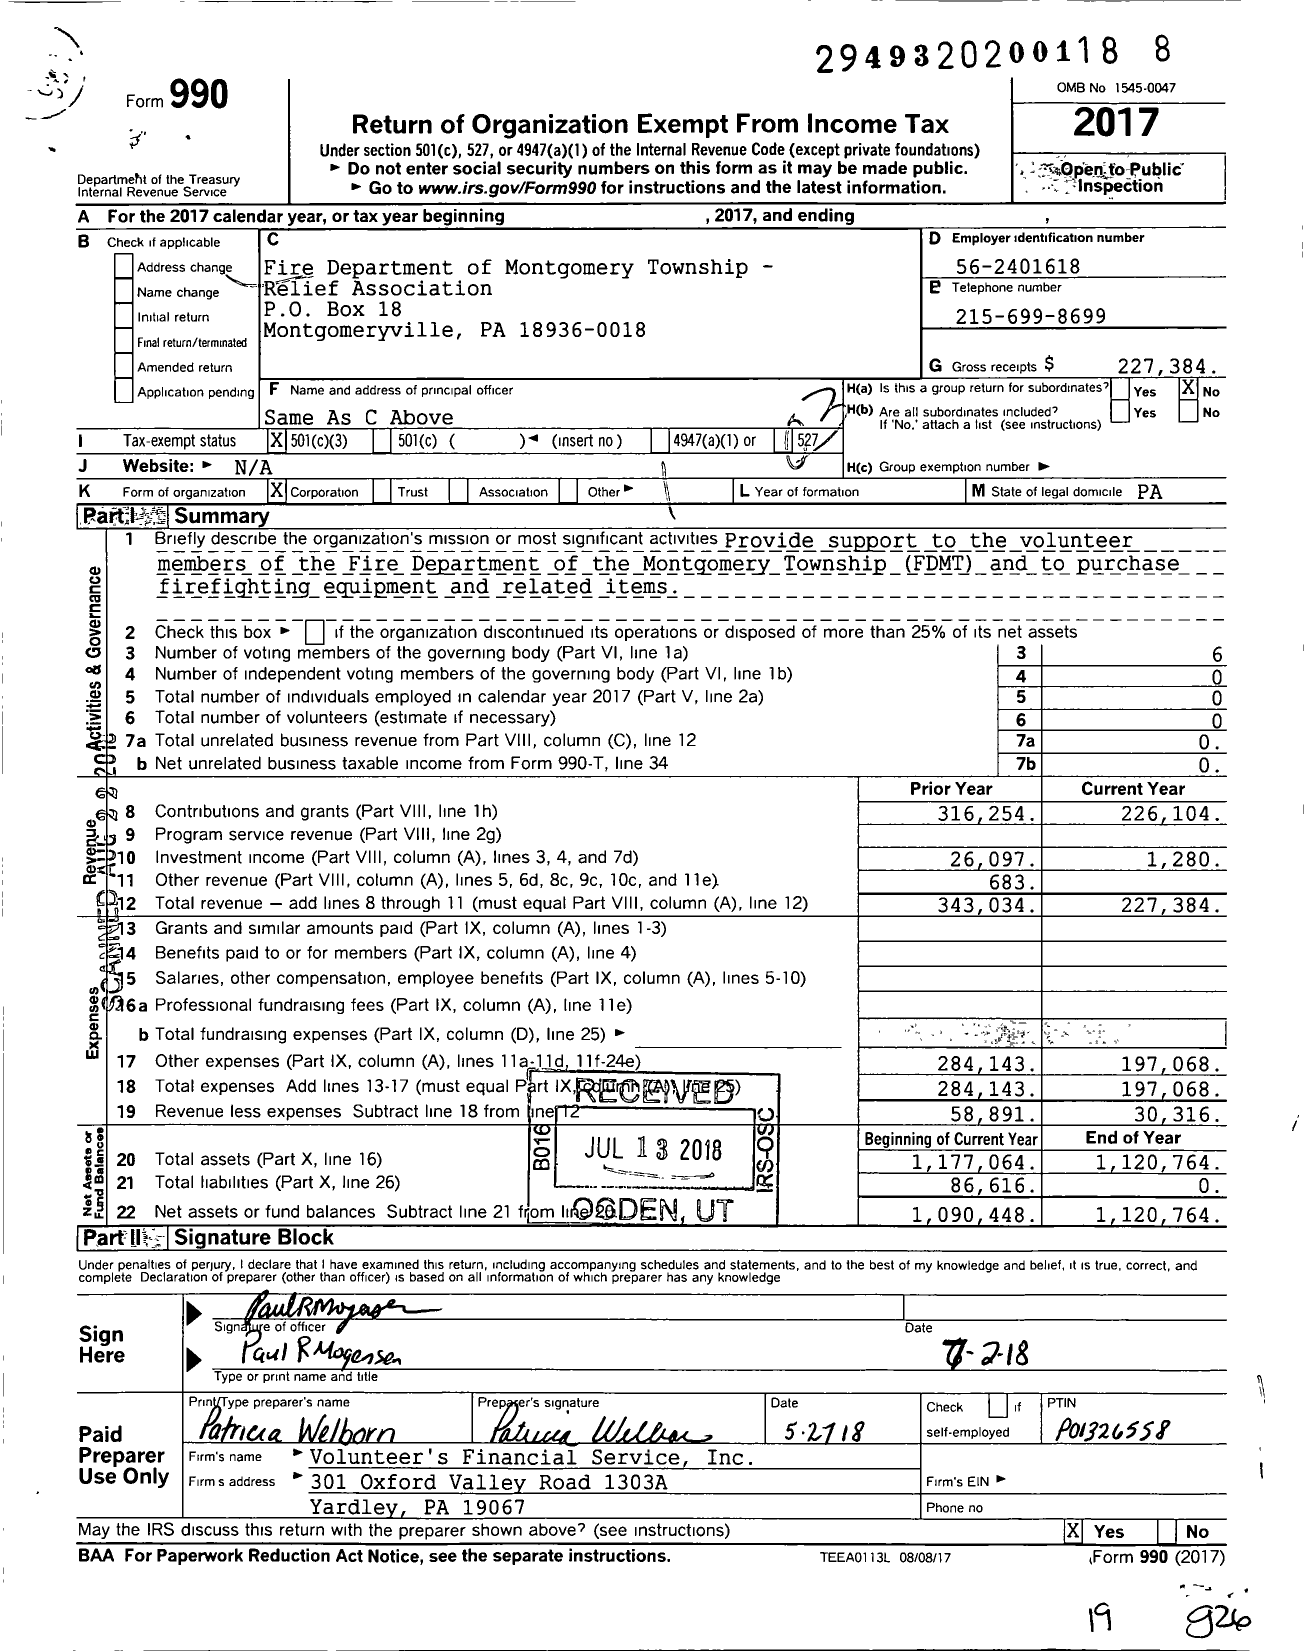 Image of first page of 2017 Form 990 for Fire Department of Montgomery Township - Relief Association